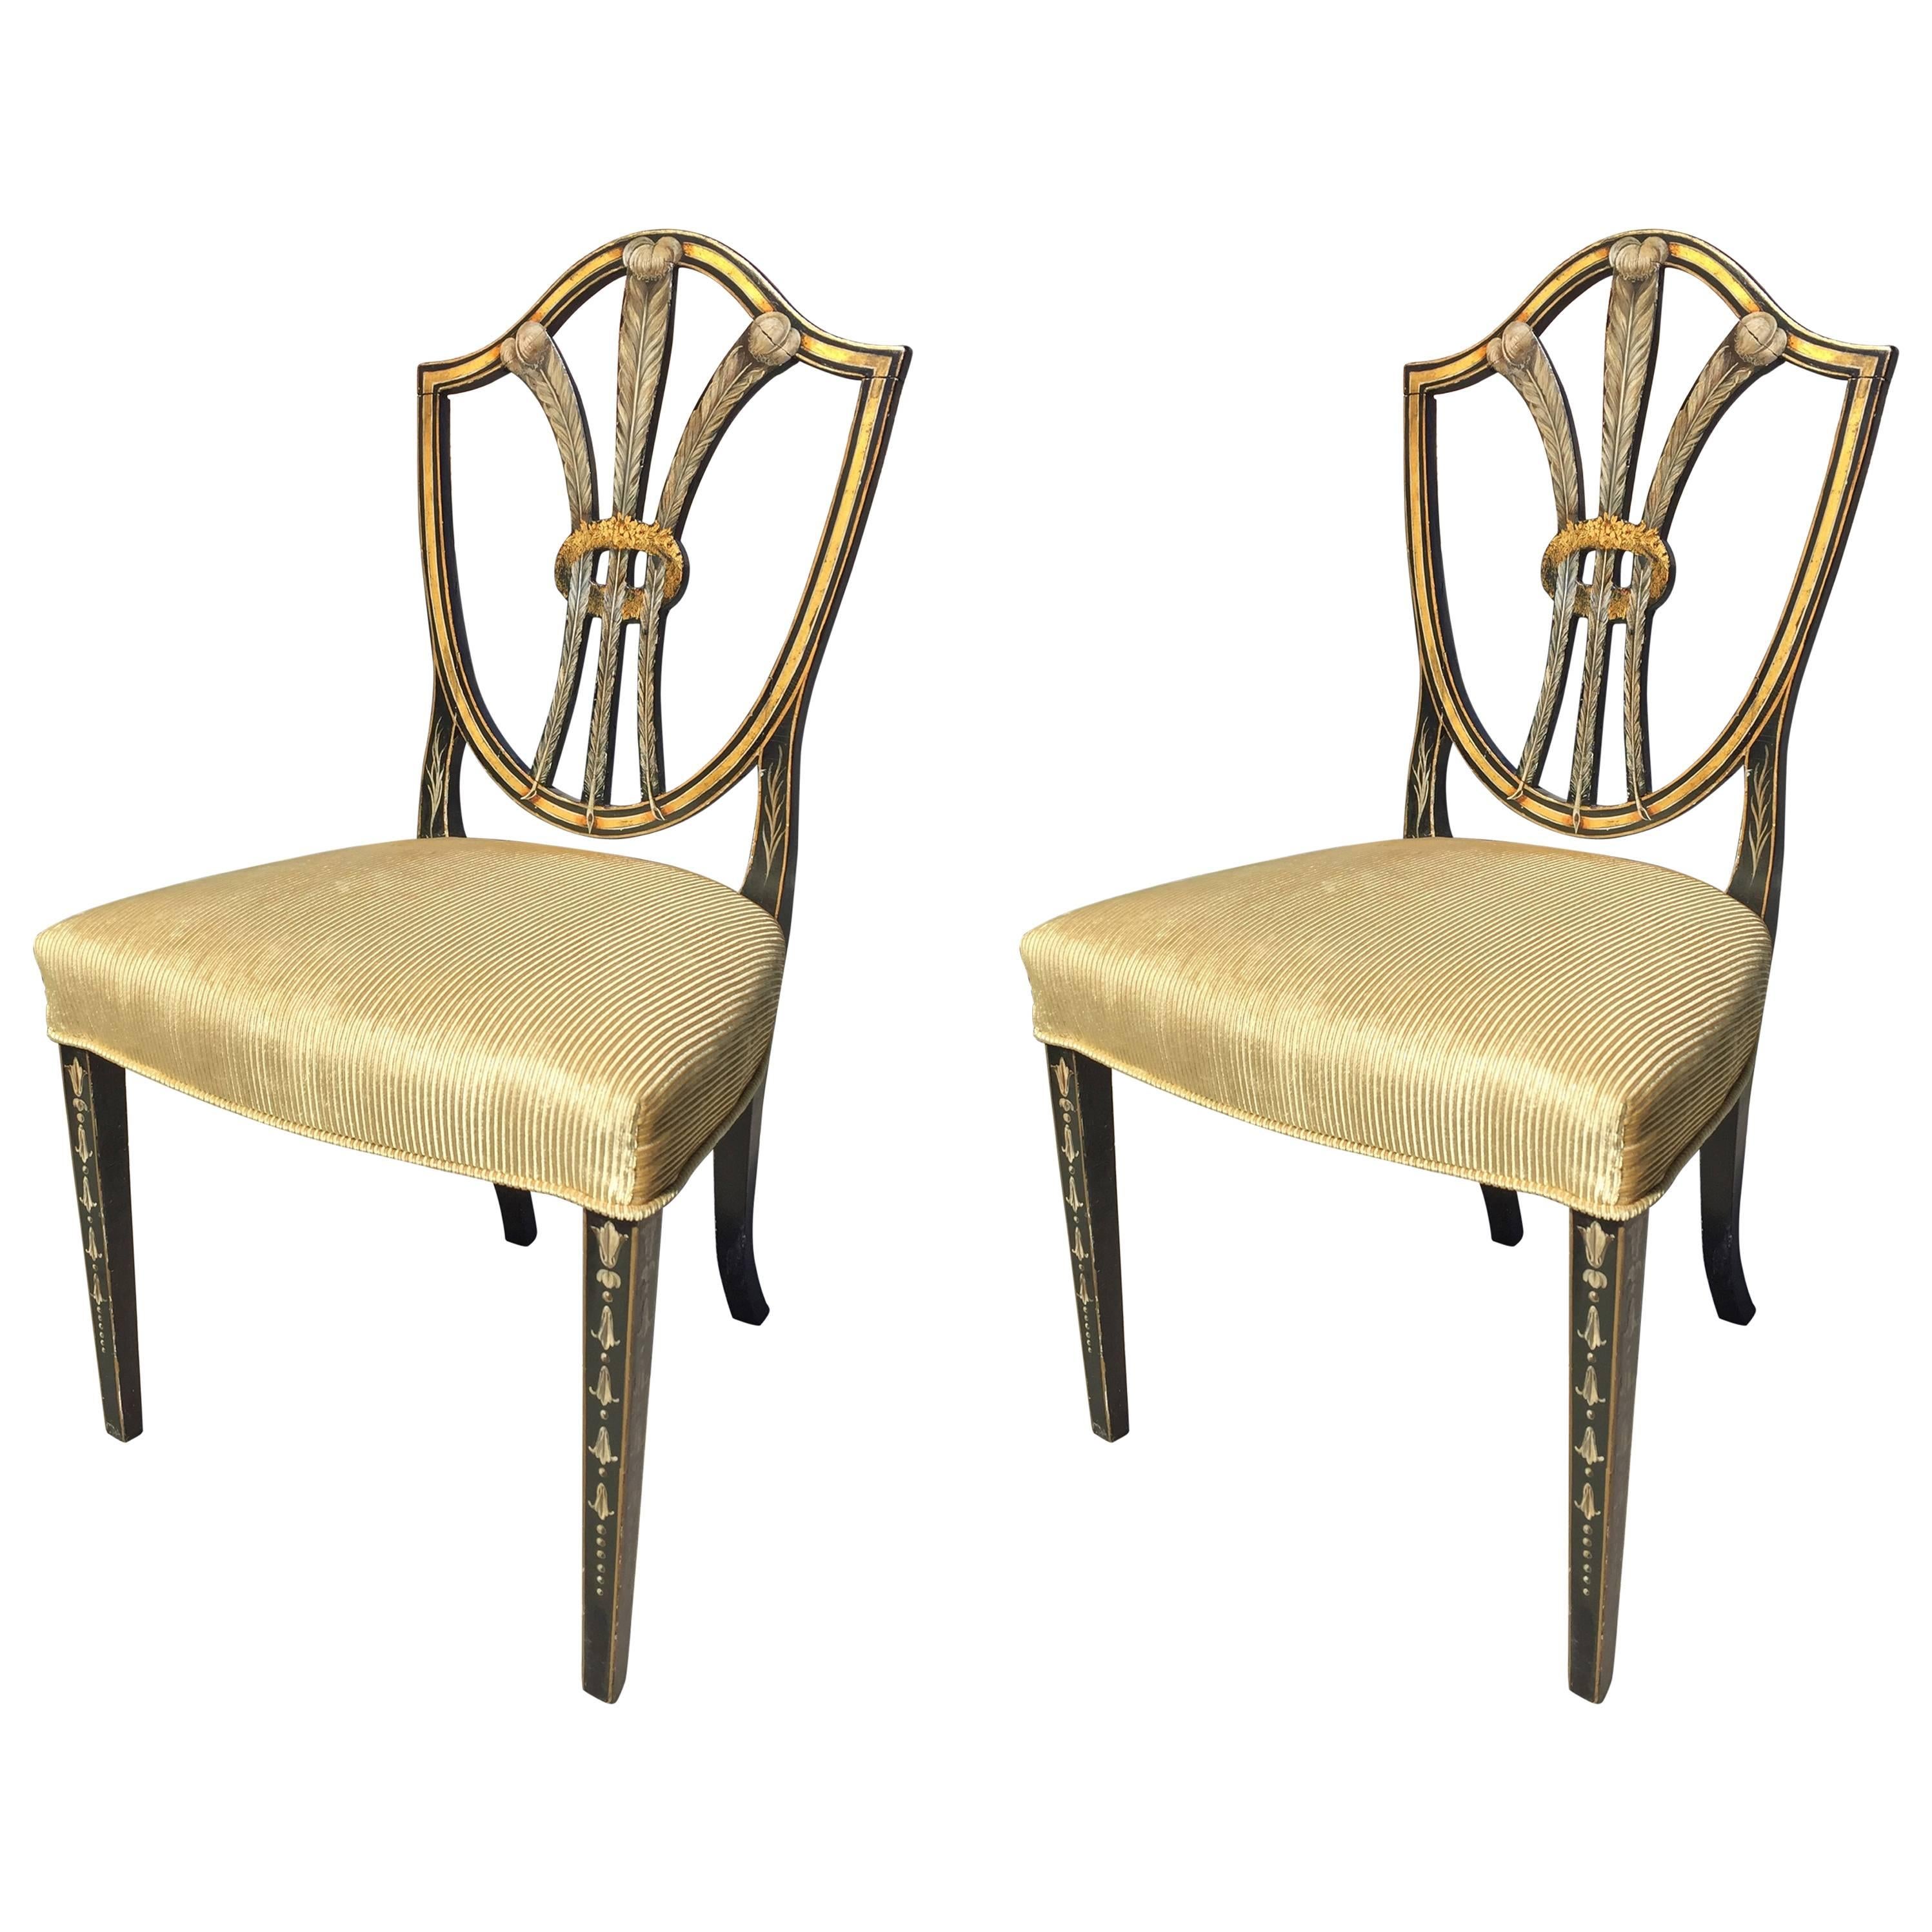 Pair of Hepplewhite Shield Back Chairs with Windsor Feather Painted Backs